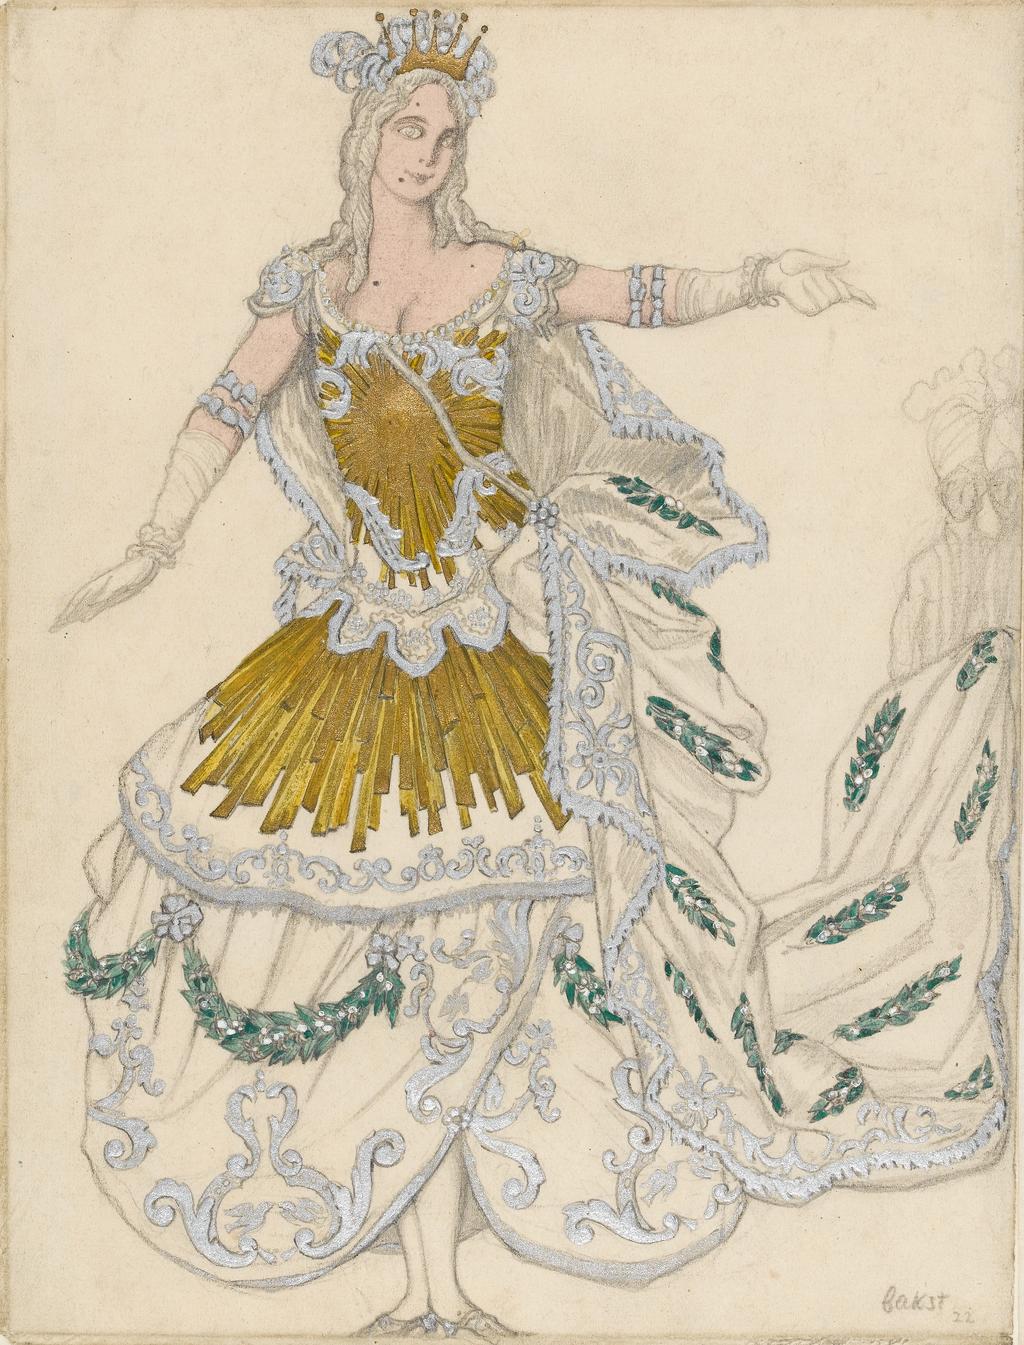 An image of Title/s: "La Princesse Aurore" Maker/s: Bakst, Leon (draughtsman) [ULAN info: 1866-1924] Technique Description: graphite, watercolour, with gold and silver paint, heightened with white, on paperDimensions: height: 300 mm, width: 227 mm Date: 1922 